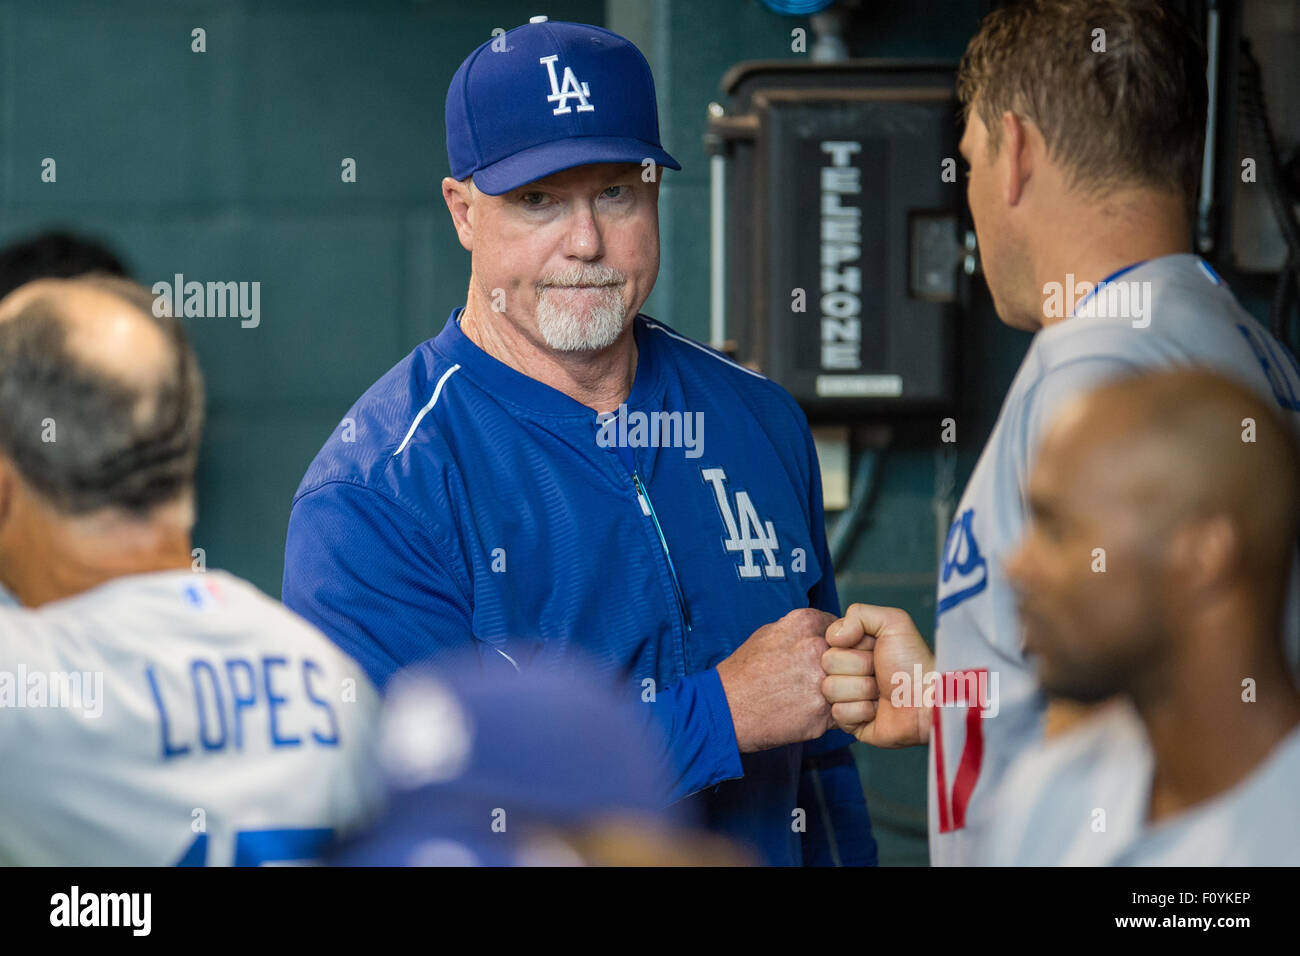 Houston, TX, USA. 23rd Aug, 2015. Los Angeles Dodgers batting coach Mark McGwire (25) bumps fists with Los Angeles Dodgers catcher A.J. Ellis (17) in the dugout prior to a Major League Baseball game between the Houston Astros and the Los Angeles Dodgers at Minute Maid Park in Houston, TX. Trask Smith/CSM/Alamy Live News Stock Photo